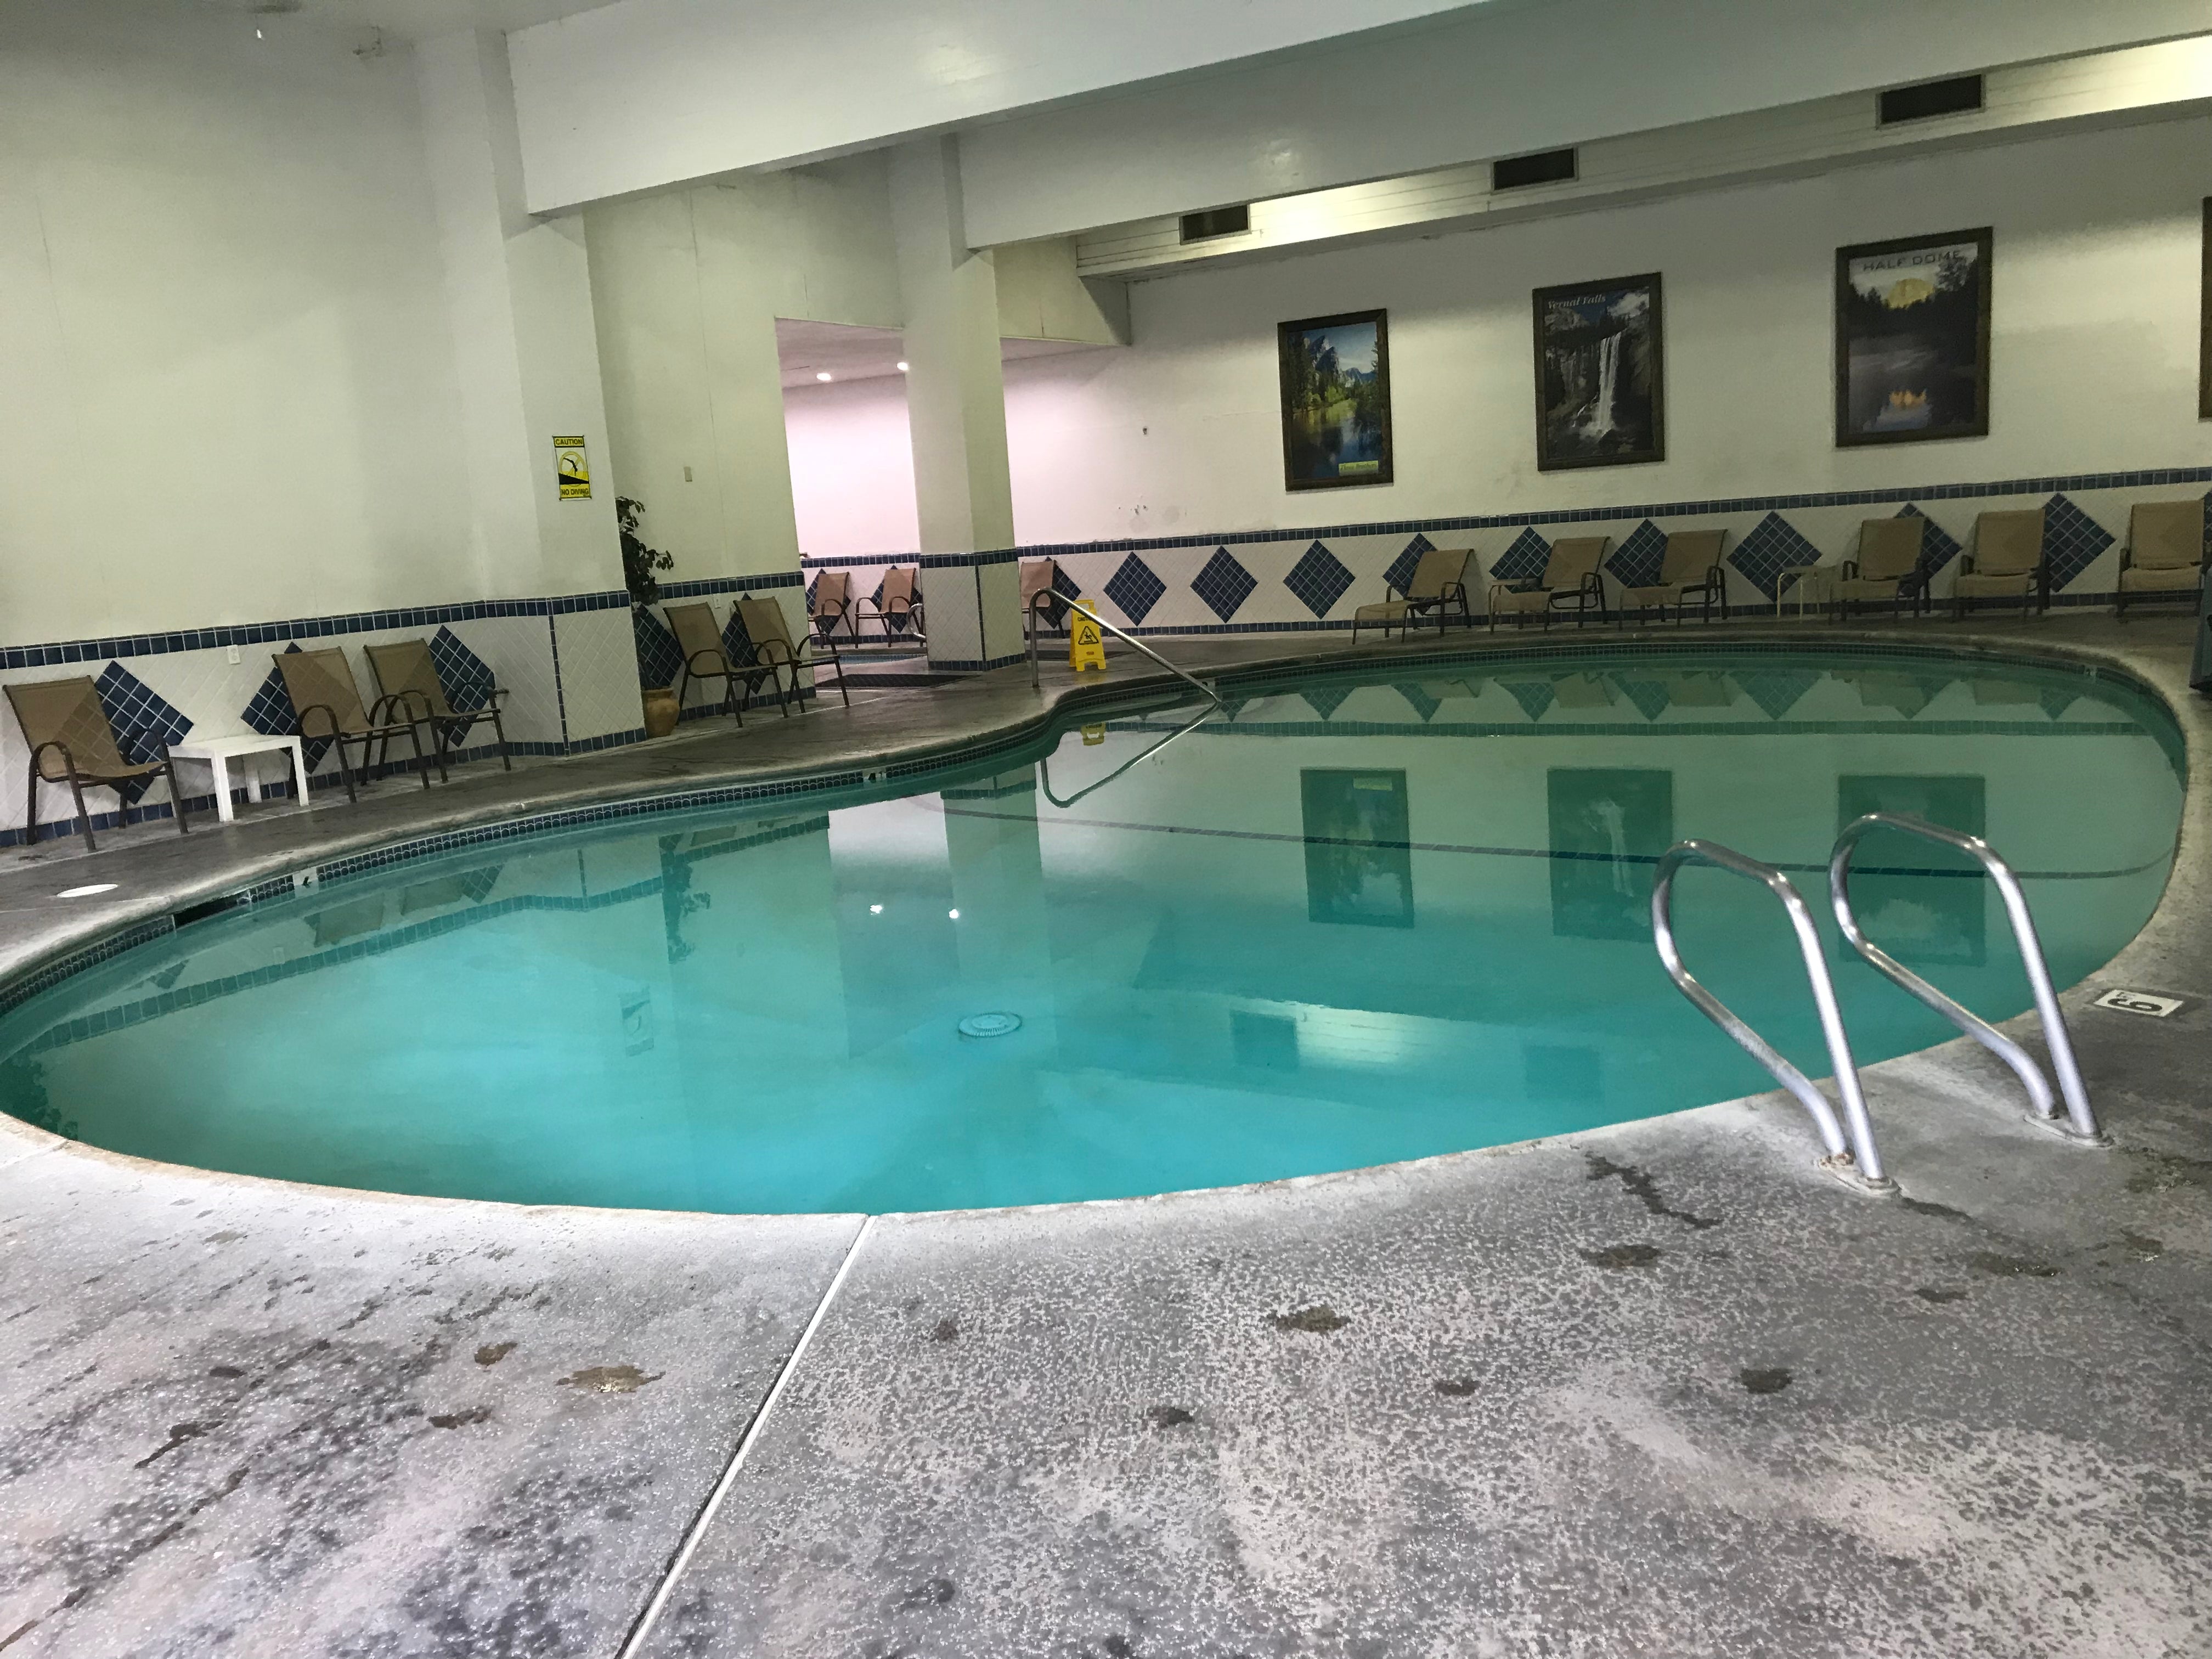 The indoor pool and hot tub (at the hotel next door) that campers can use.